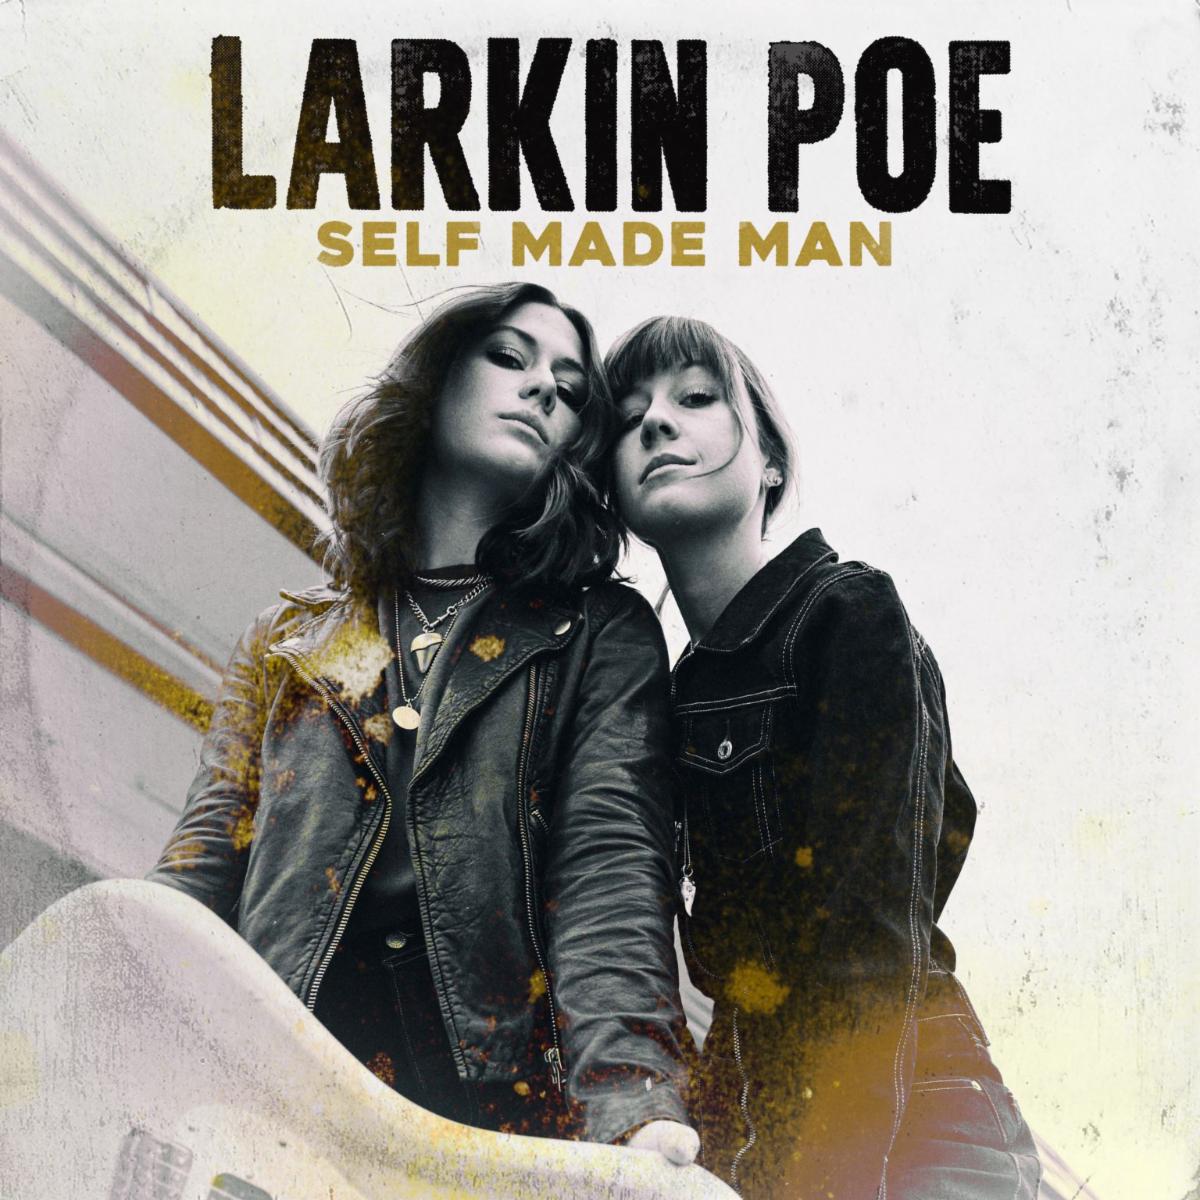 “Larkin Poe shove cock-rock out of the way with 'Self Made Man'”